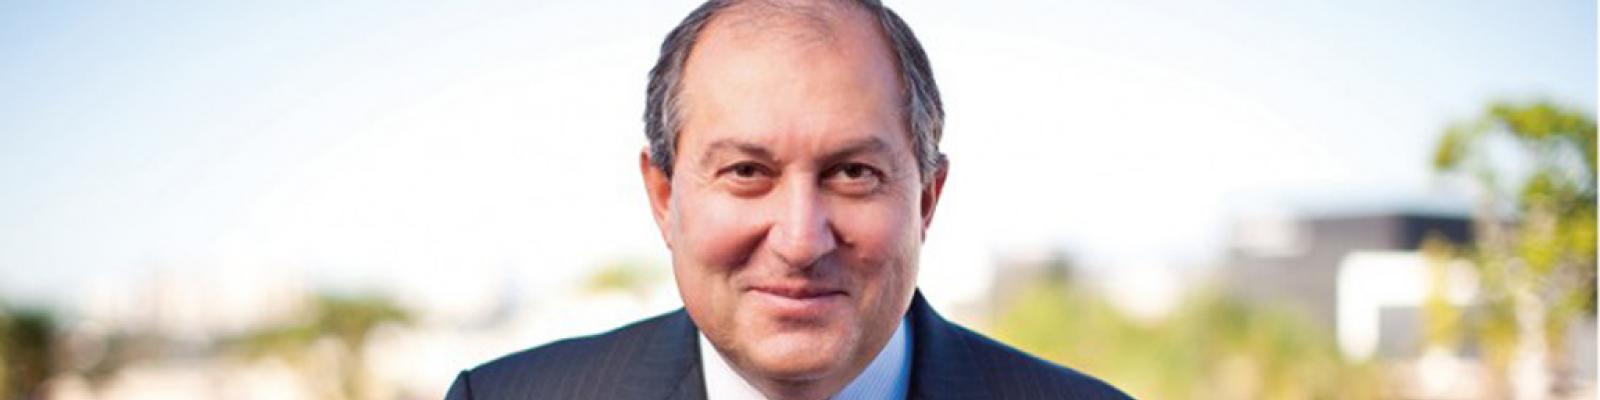 Sarkissian Discusses Building Consensus on Cybersecurity